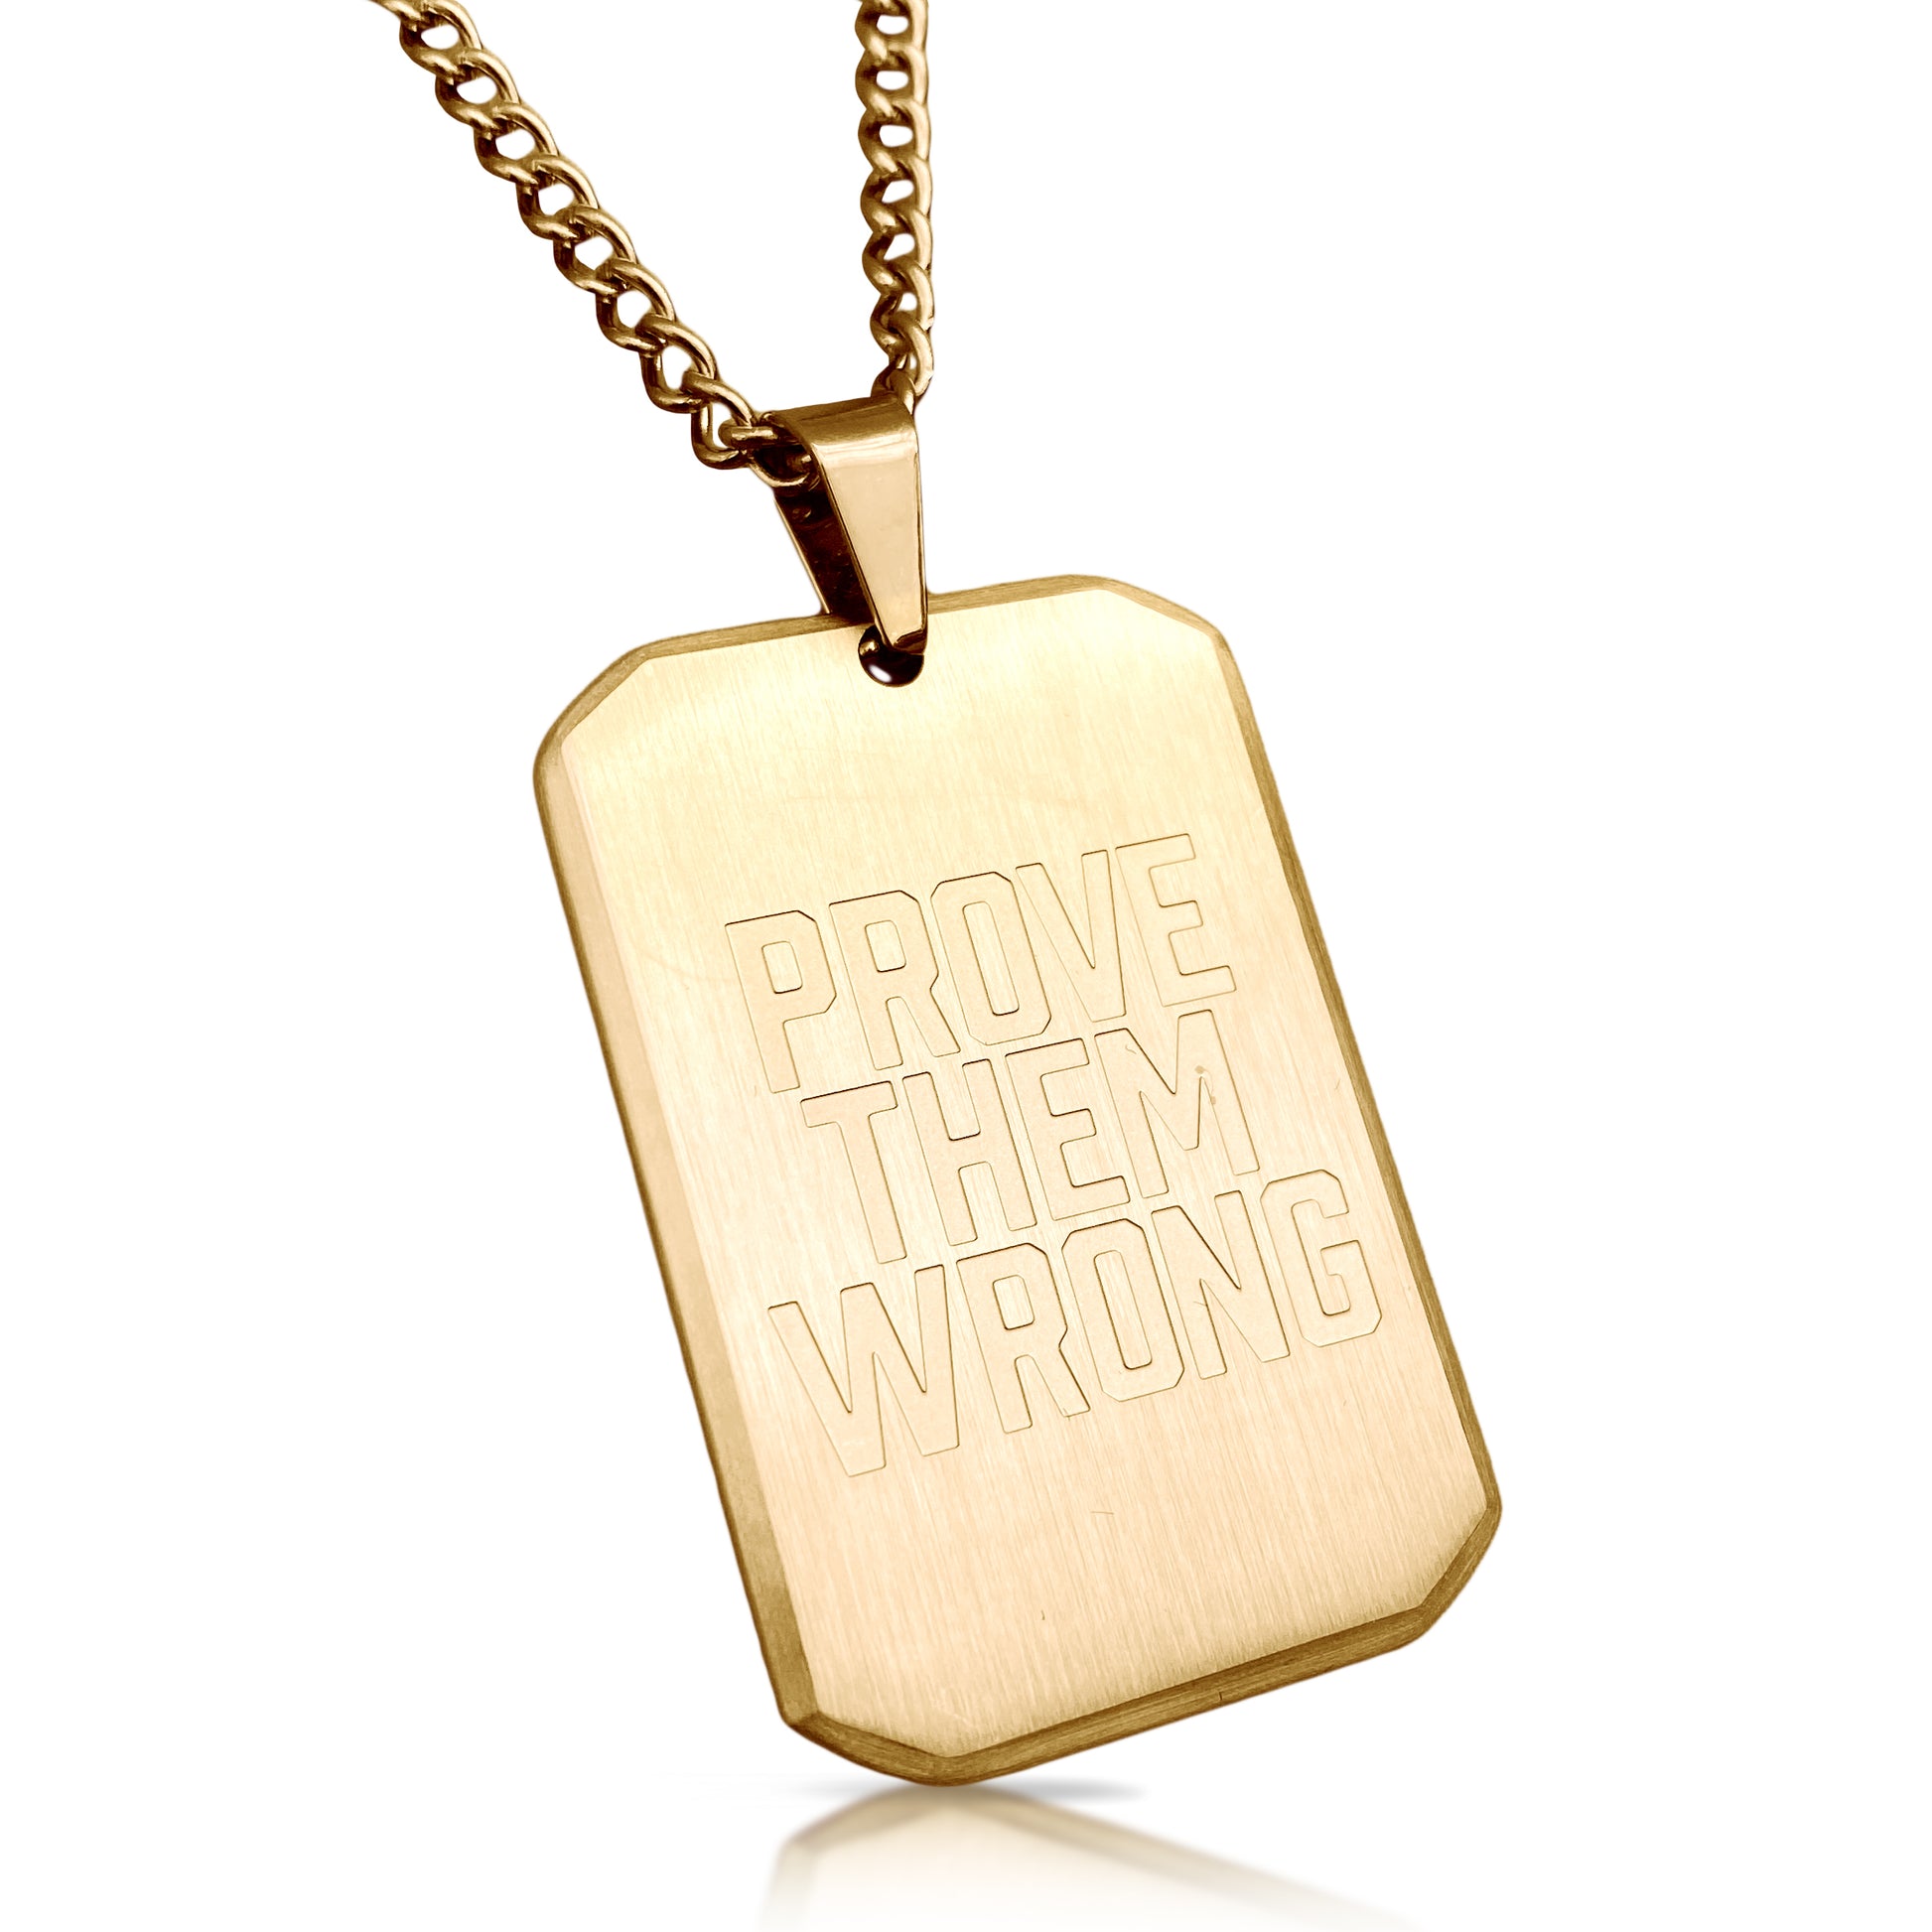 Prove Them Wrong Pendant With Chain Necklace - 14K Gold Plated Stainless Steel